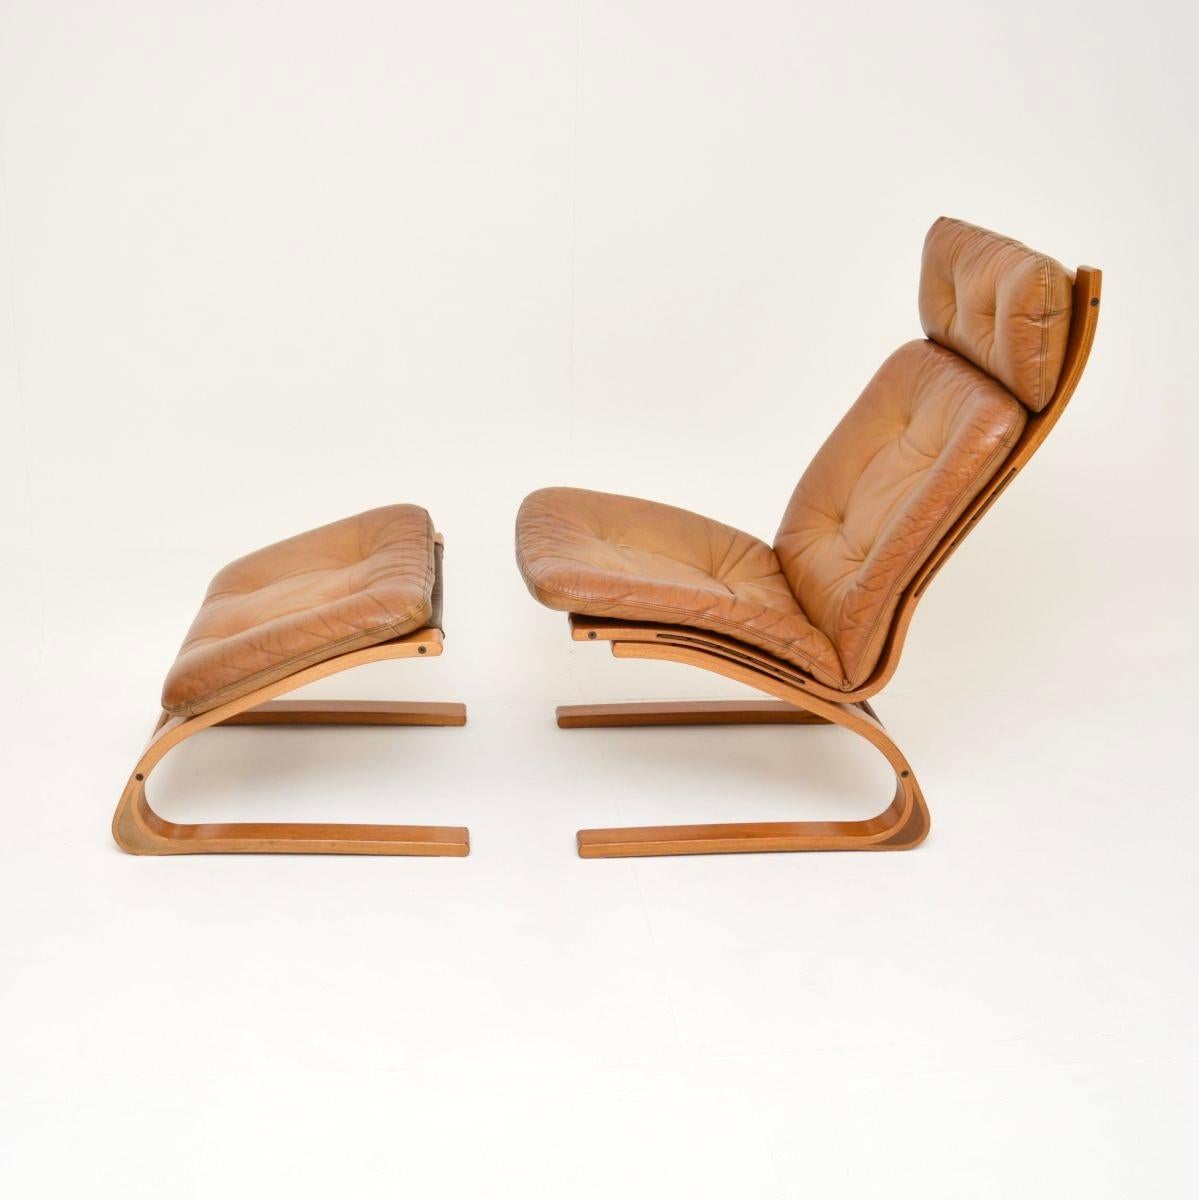 Mid-Century Modern Vintage Leather Kengu Chair and Stool by Elsa and Nordahl Solheim for Rykken For Sale